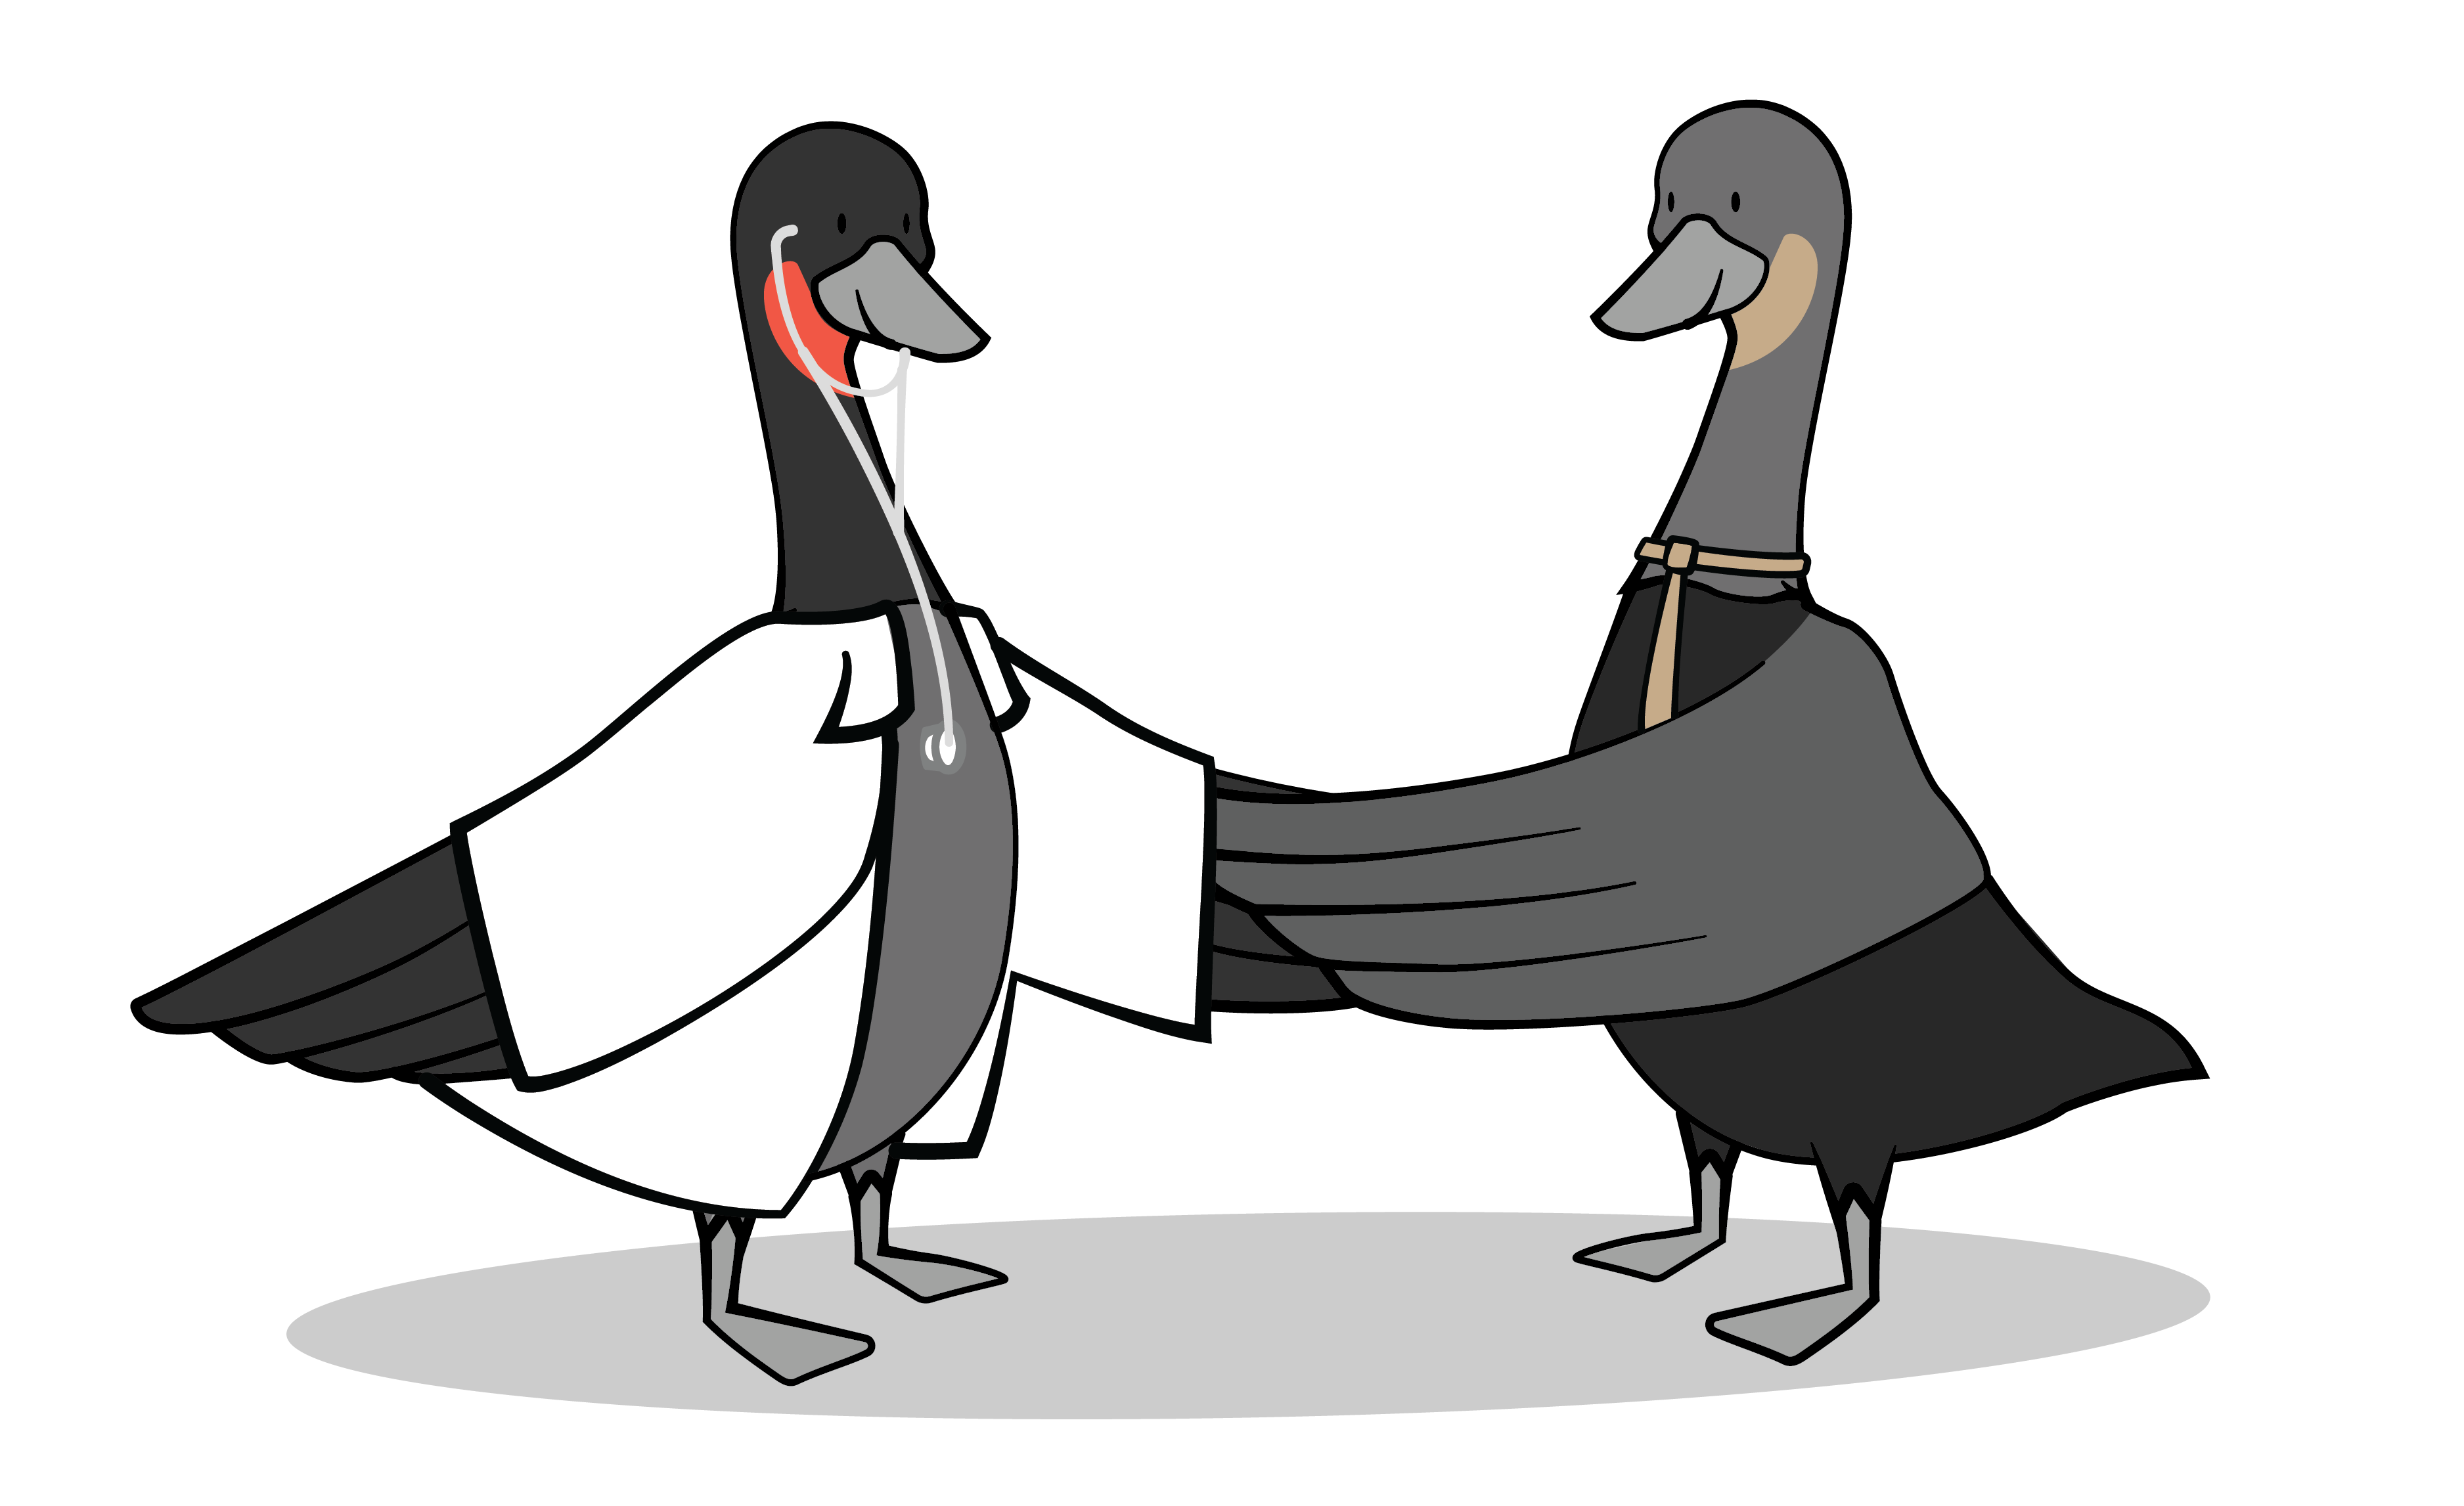 Doctor goose with stethoscope shaking hands with goose wearing necktie